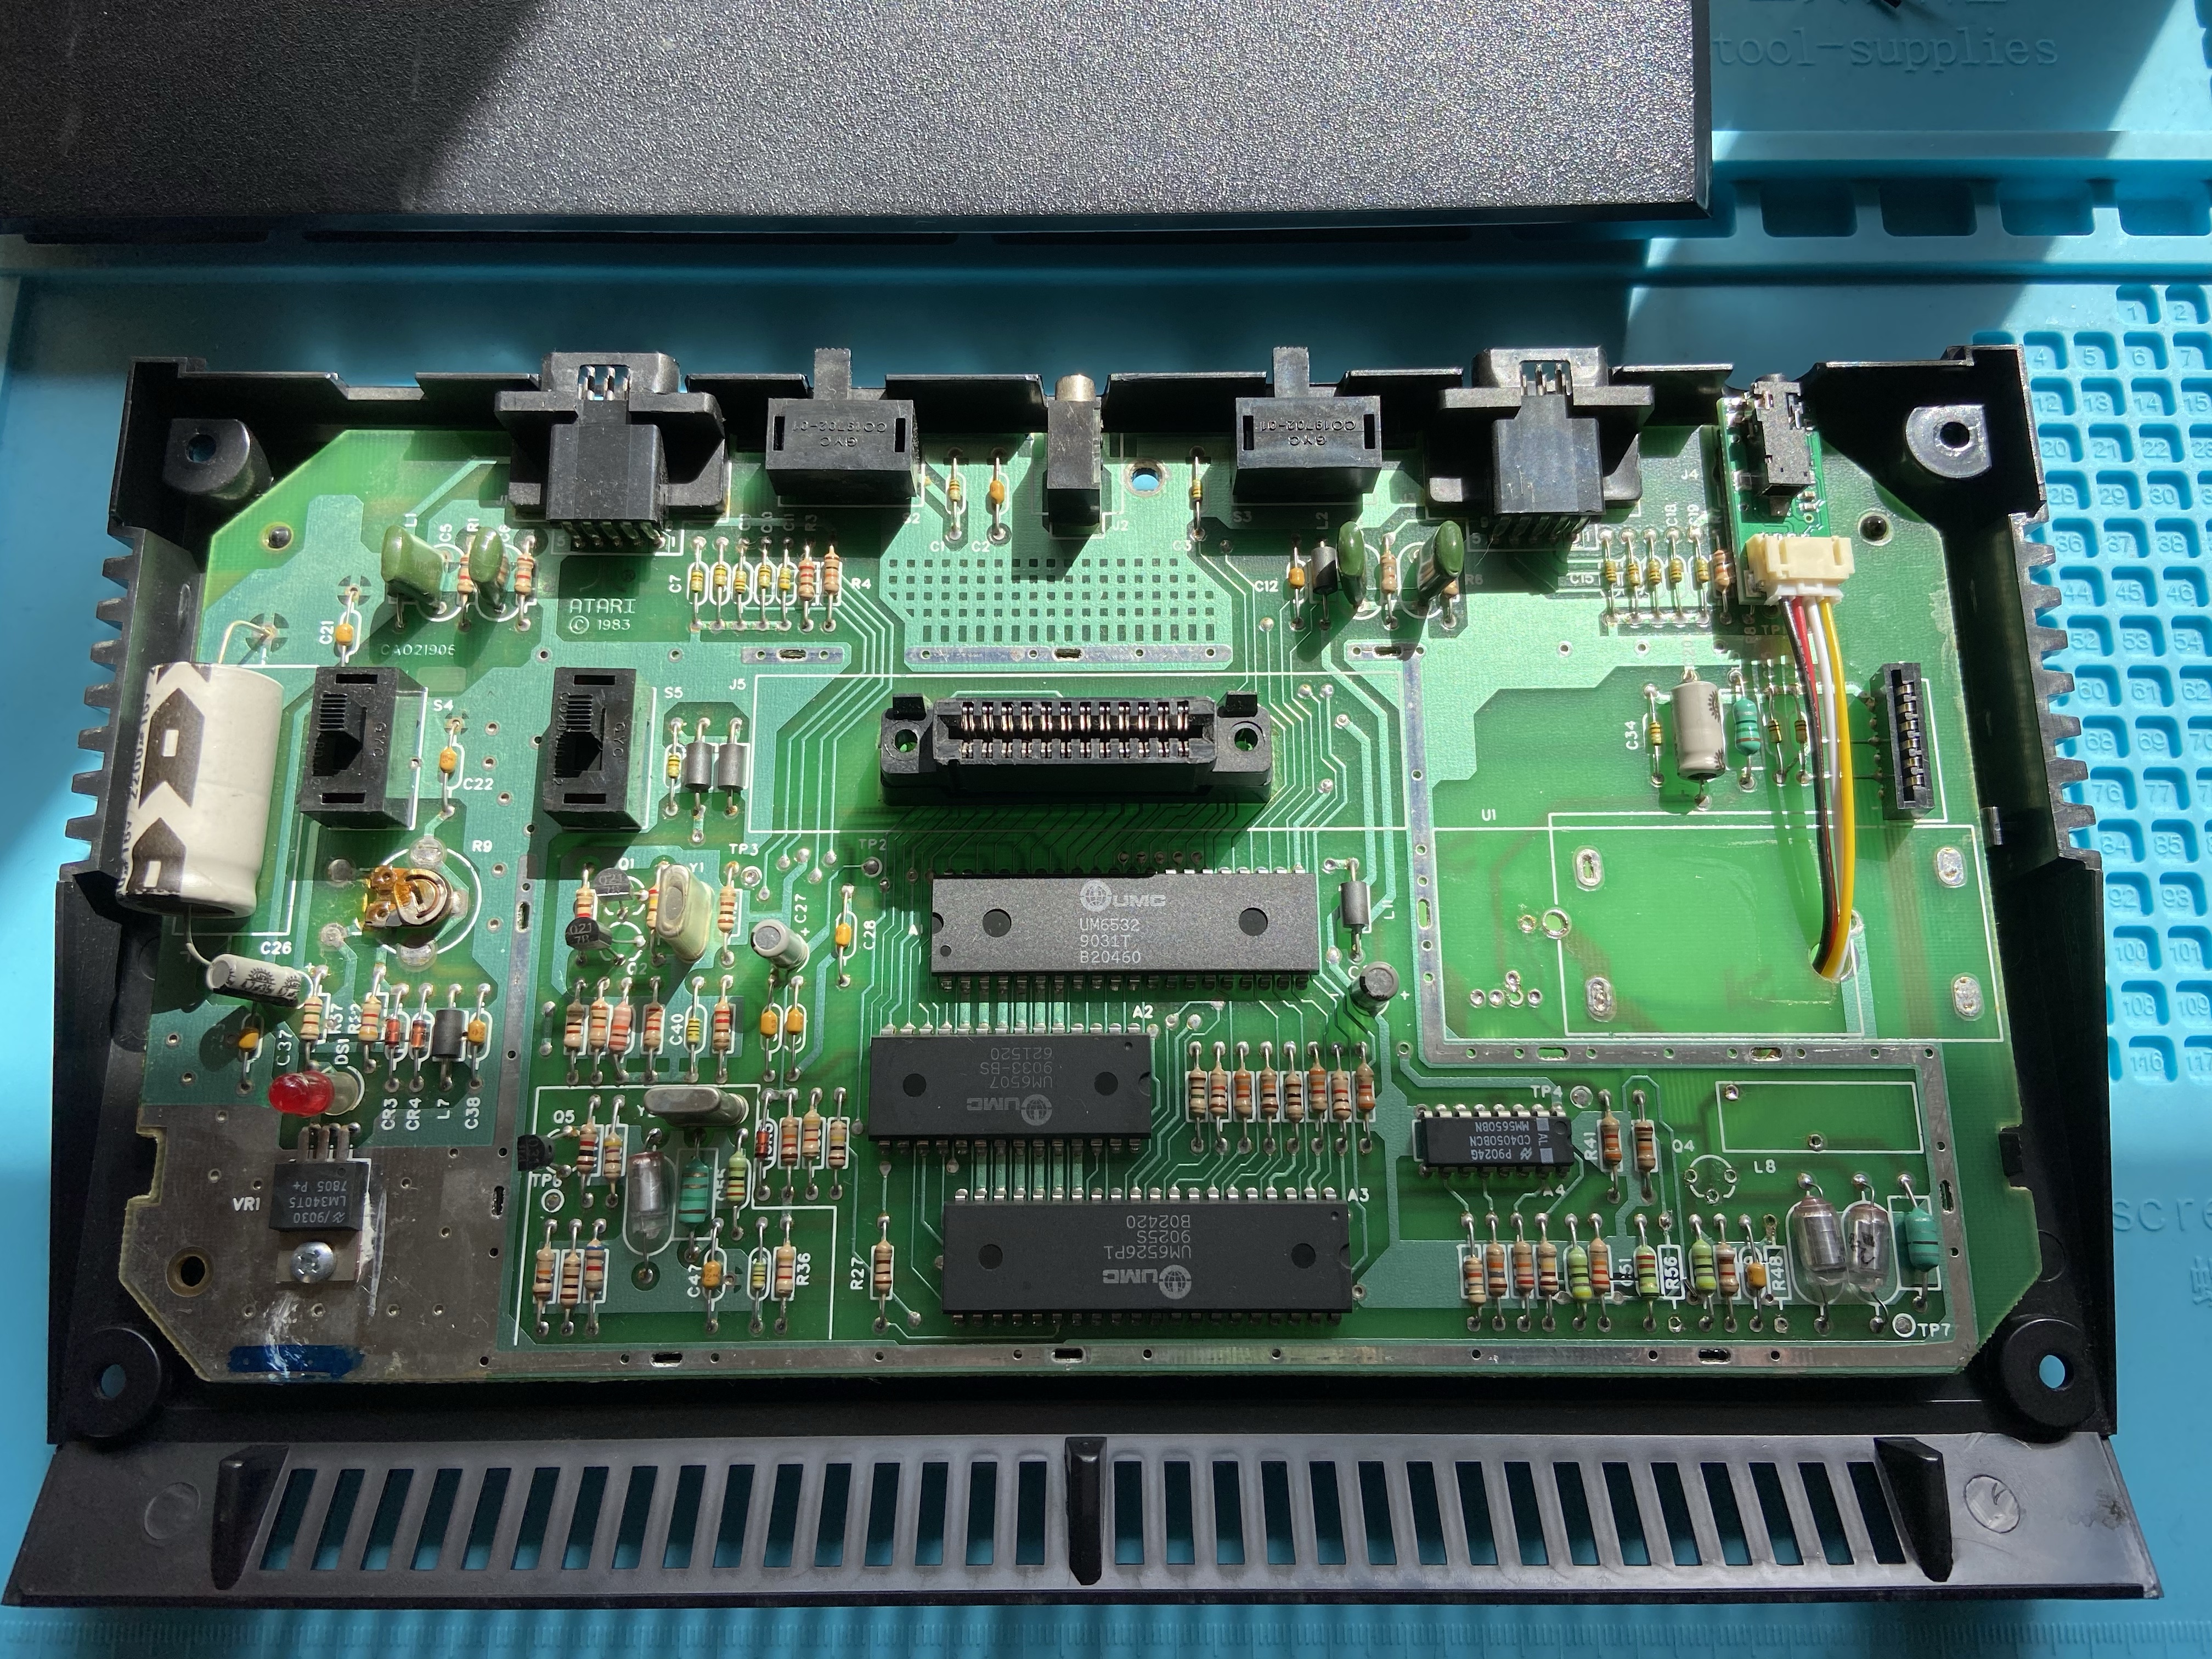 Atari 2600 Jr. with composite mod installed